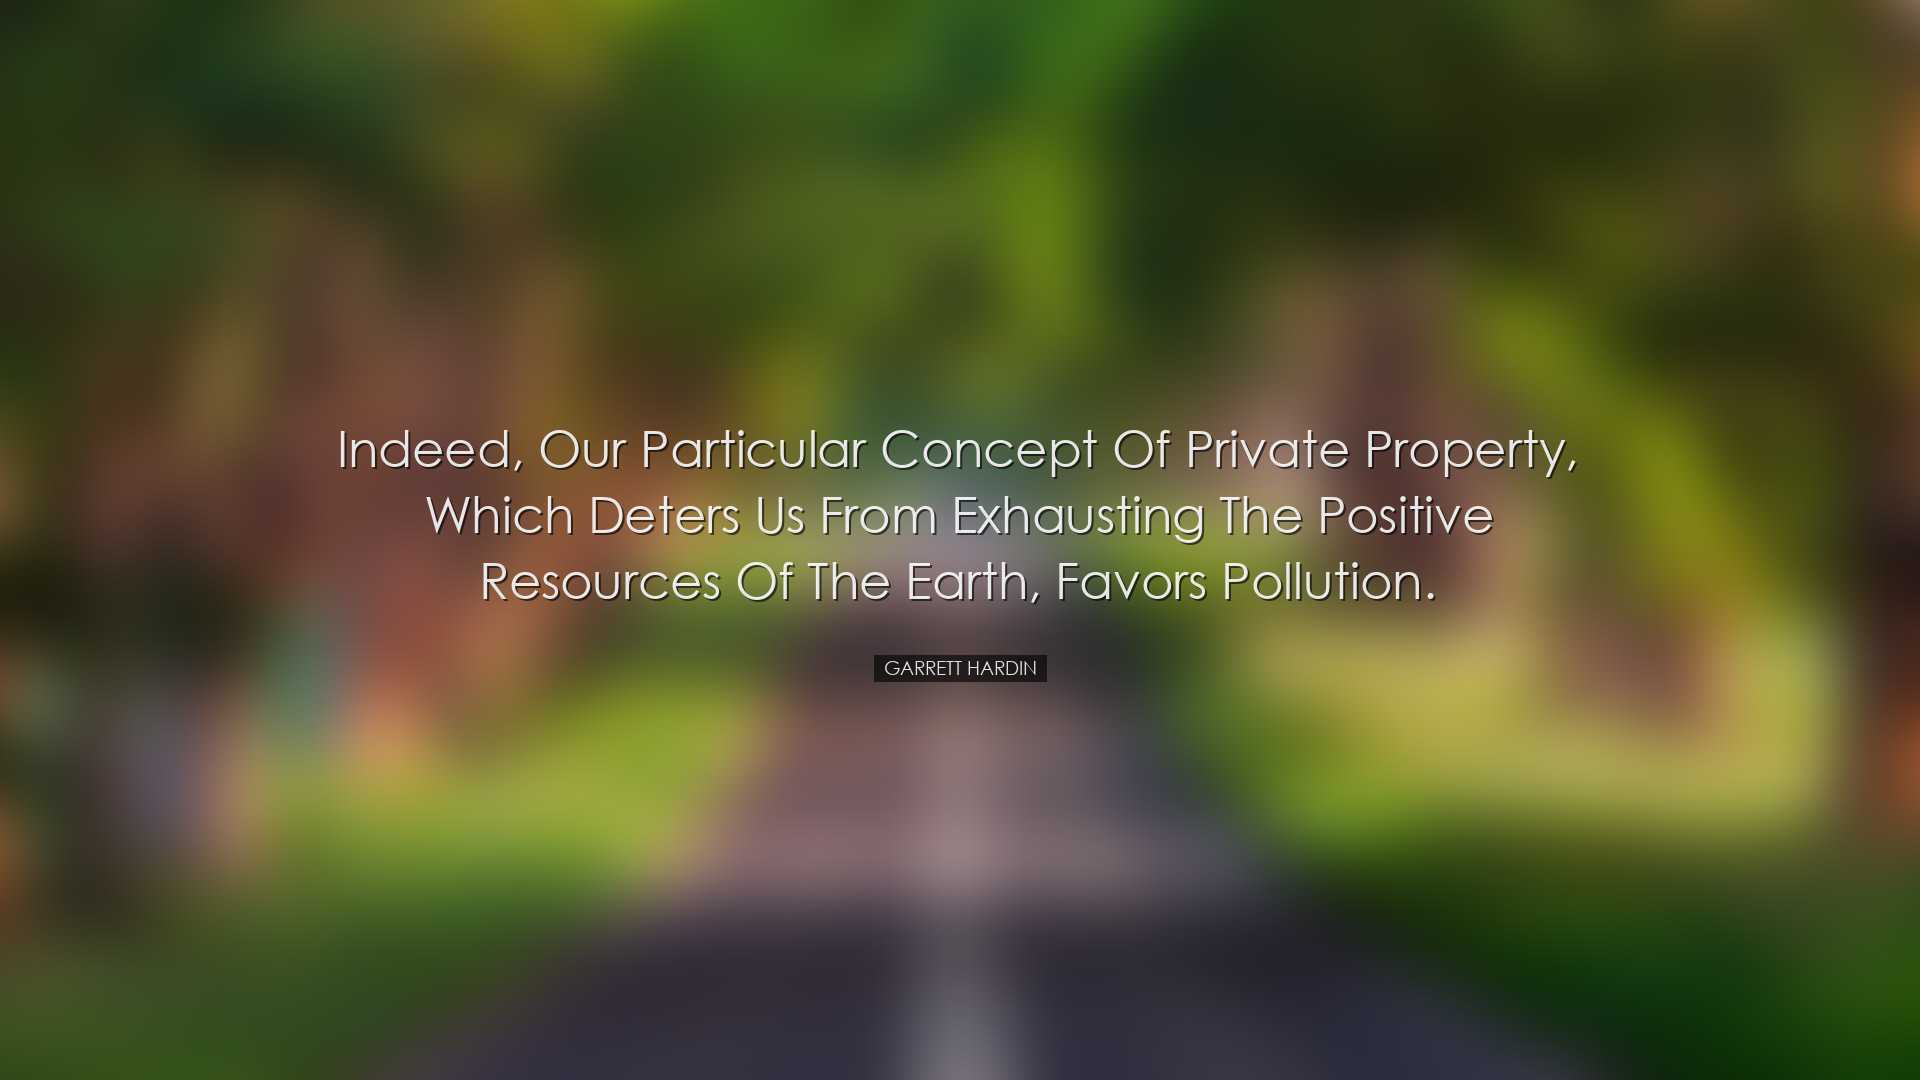 Indeed, our particular concept of private property, which deters u